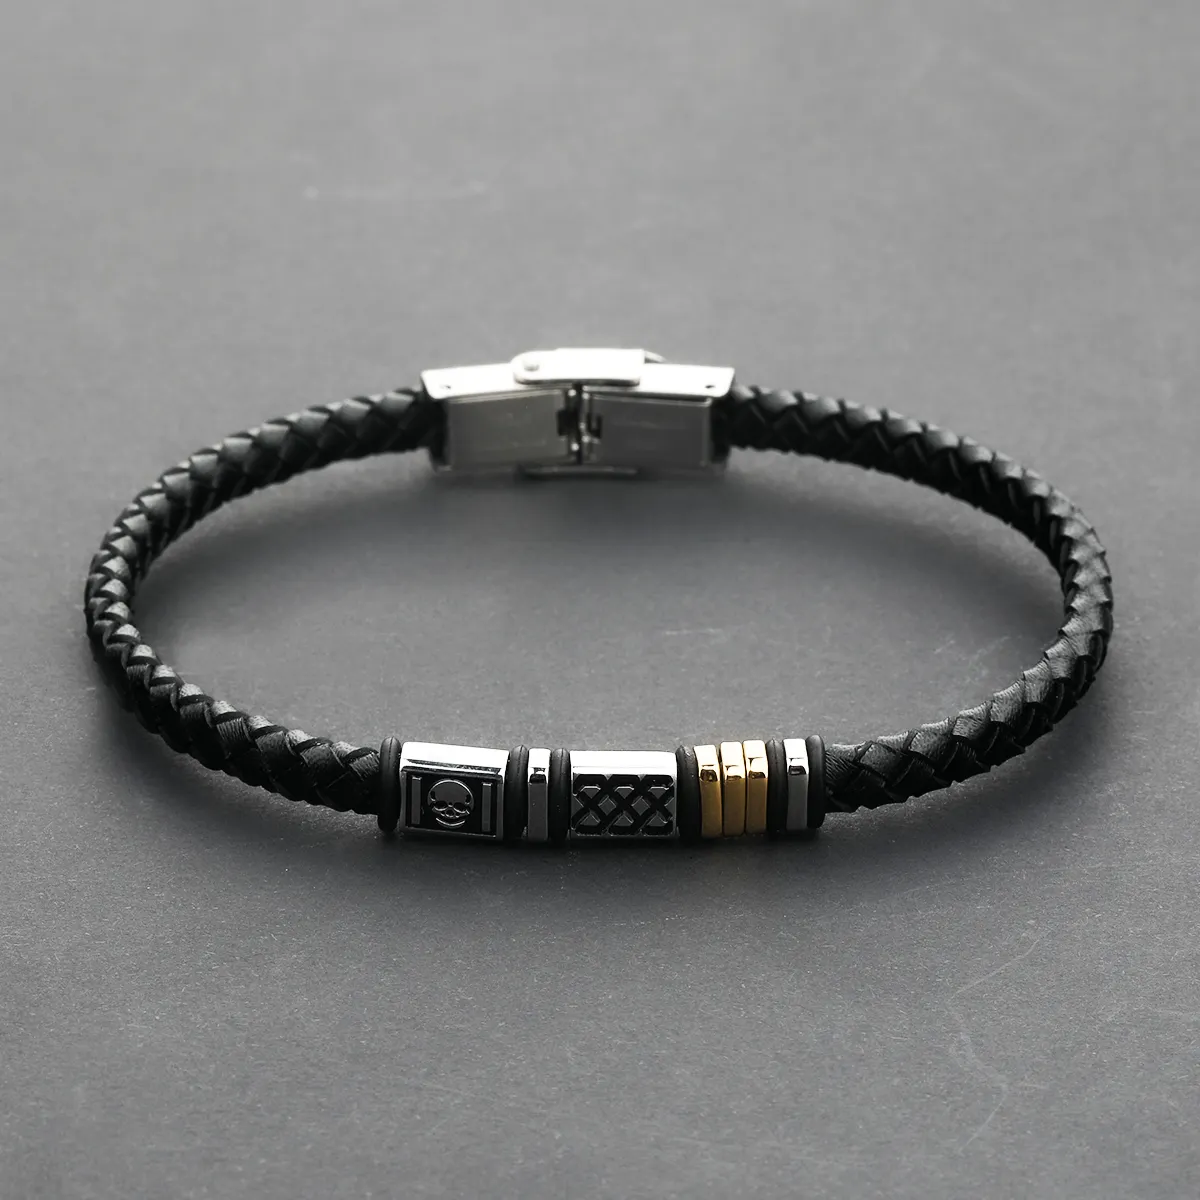 ELIO New Hip hop Leather Bracelet Mens Stainless Steel Gold And Silver Skull Braided Leather Bracelet Bangle